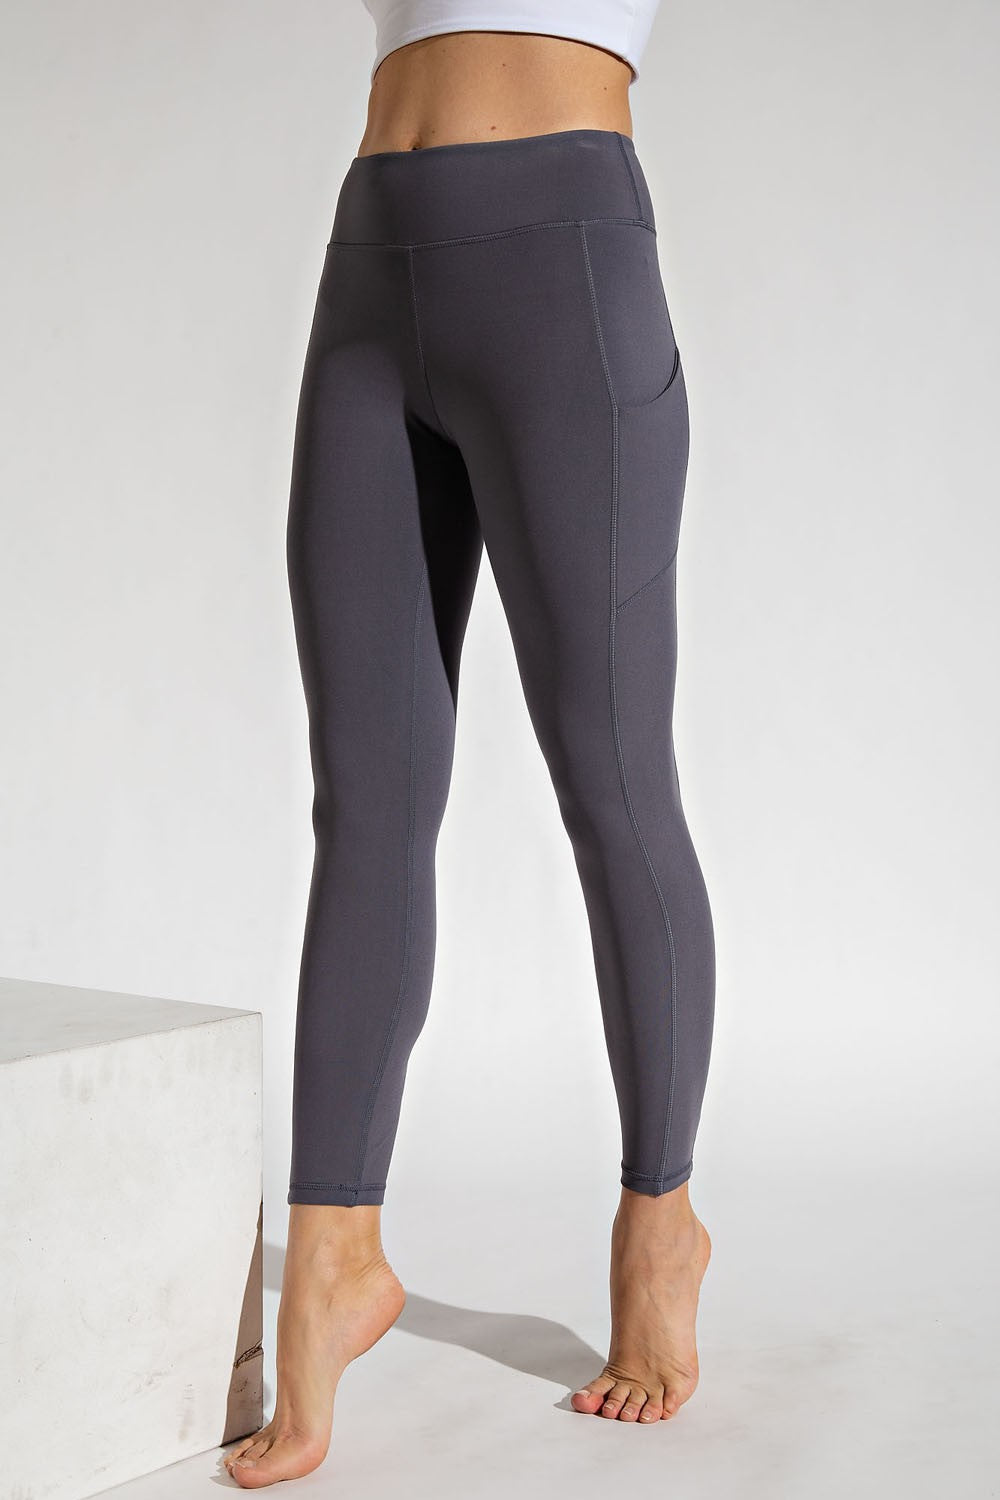 Soft As Butter Pocket Leggings in Charcoal